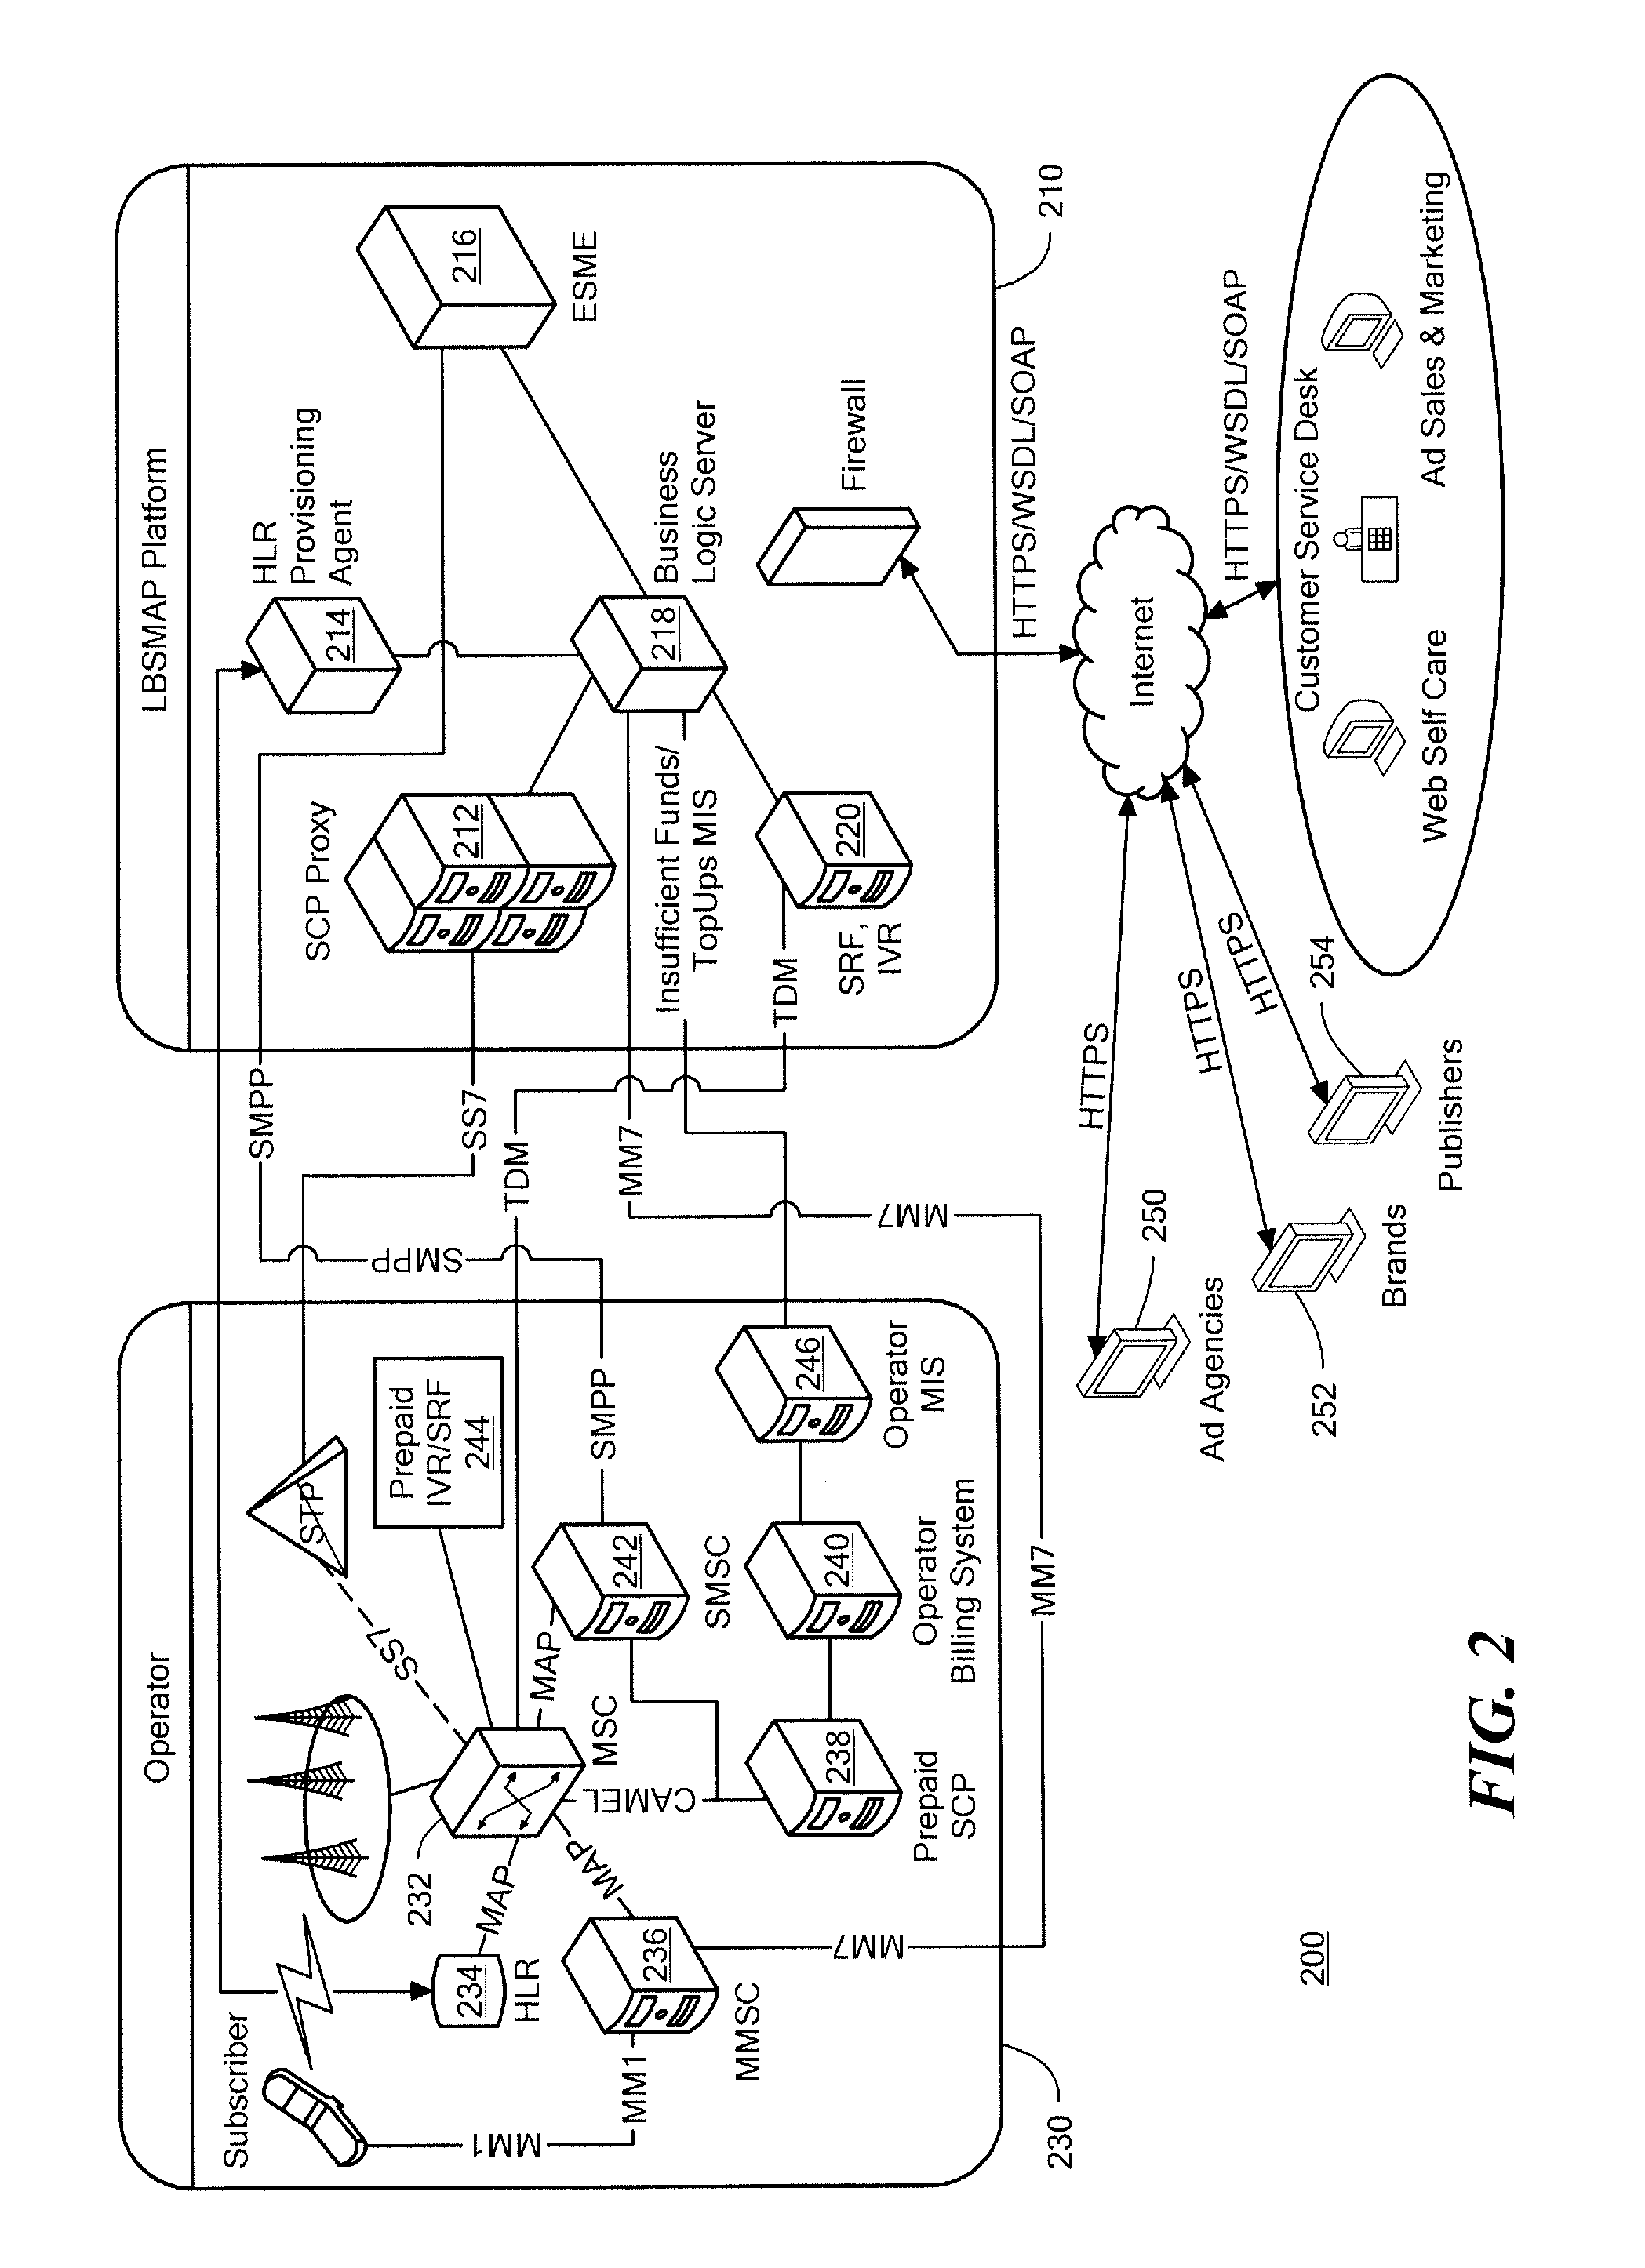 Method and apparatus for rule triggered mobile advertising